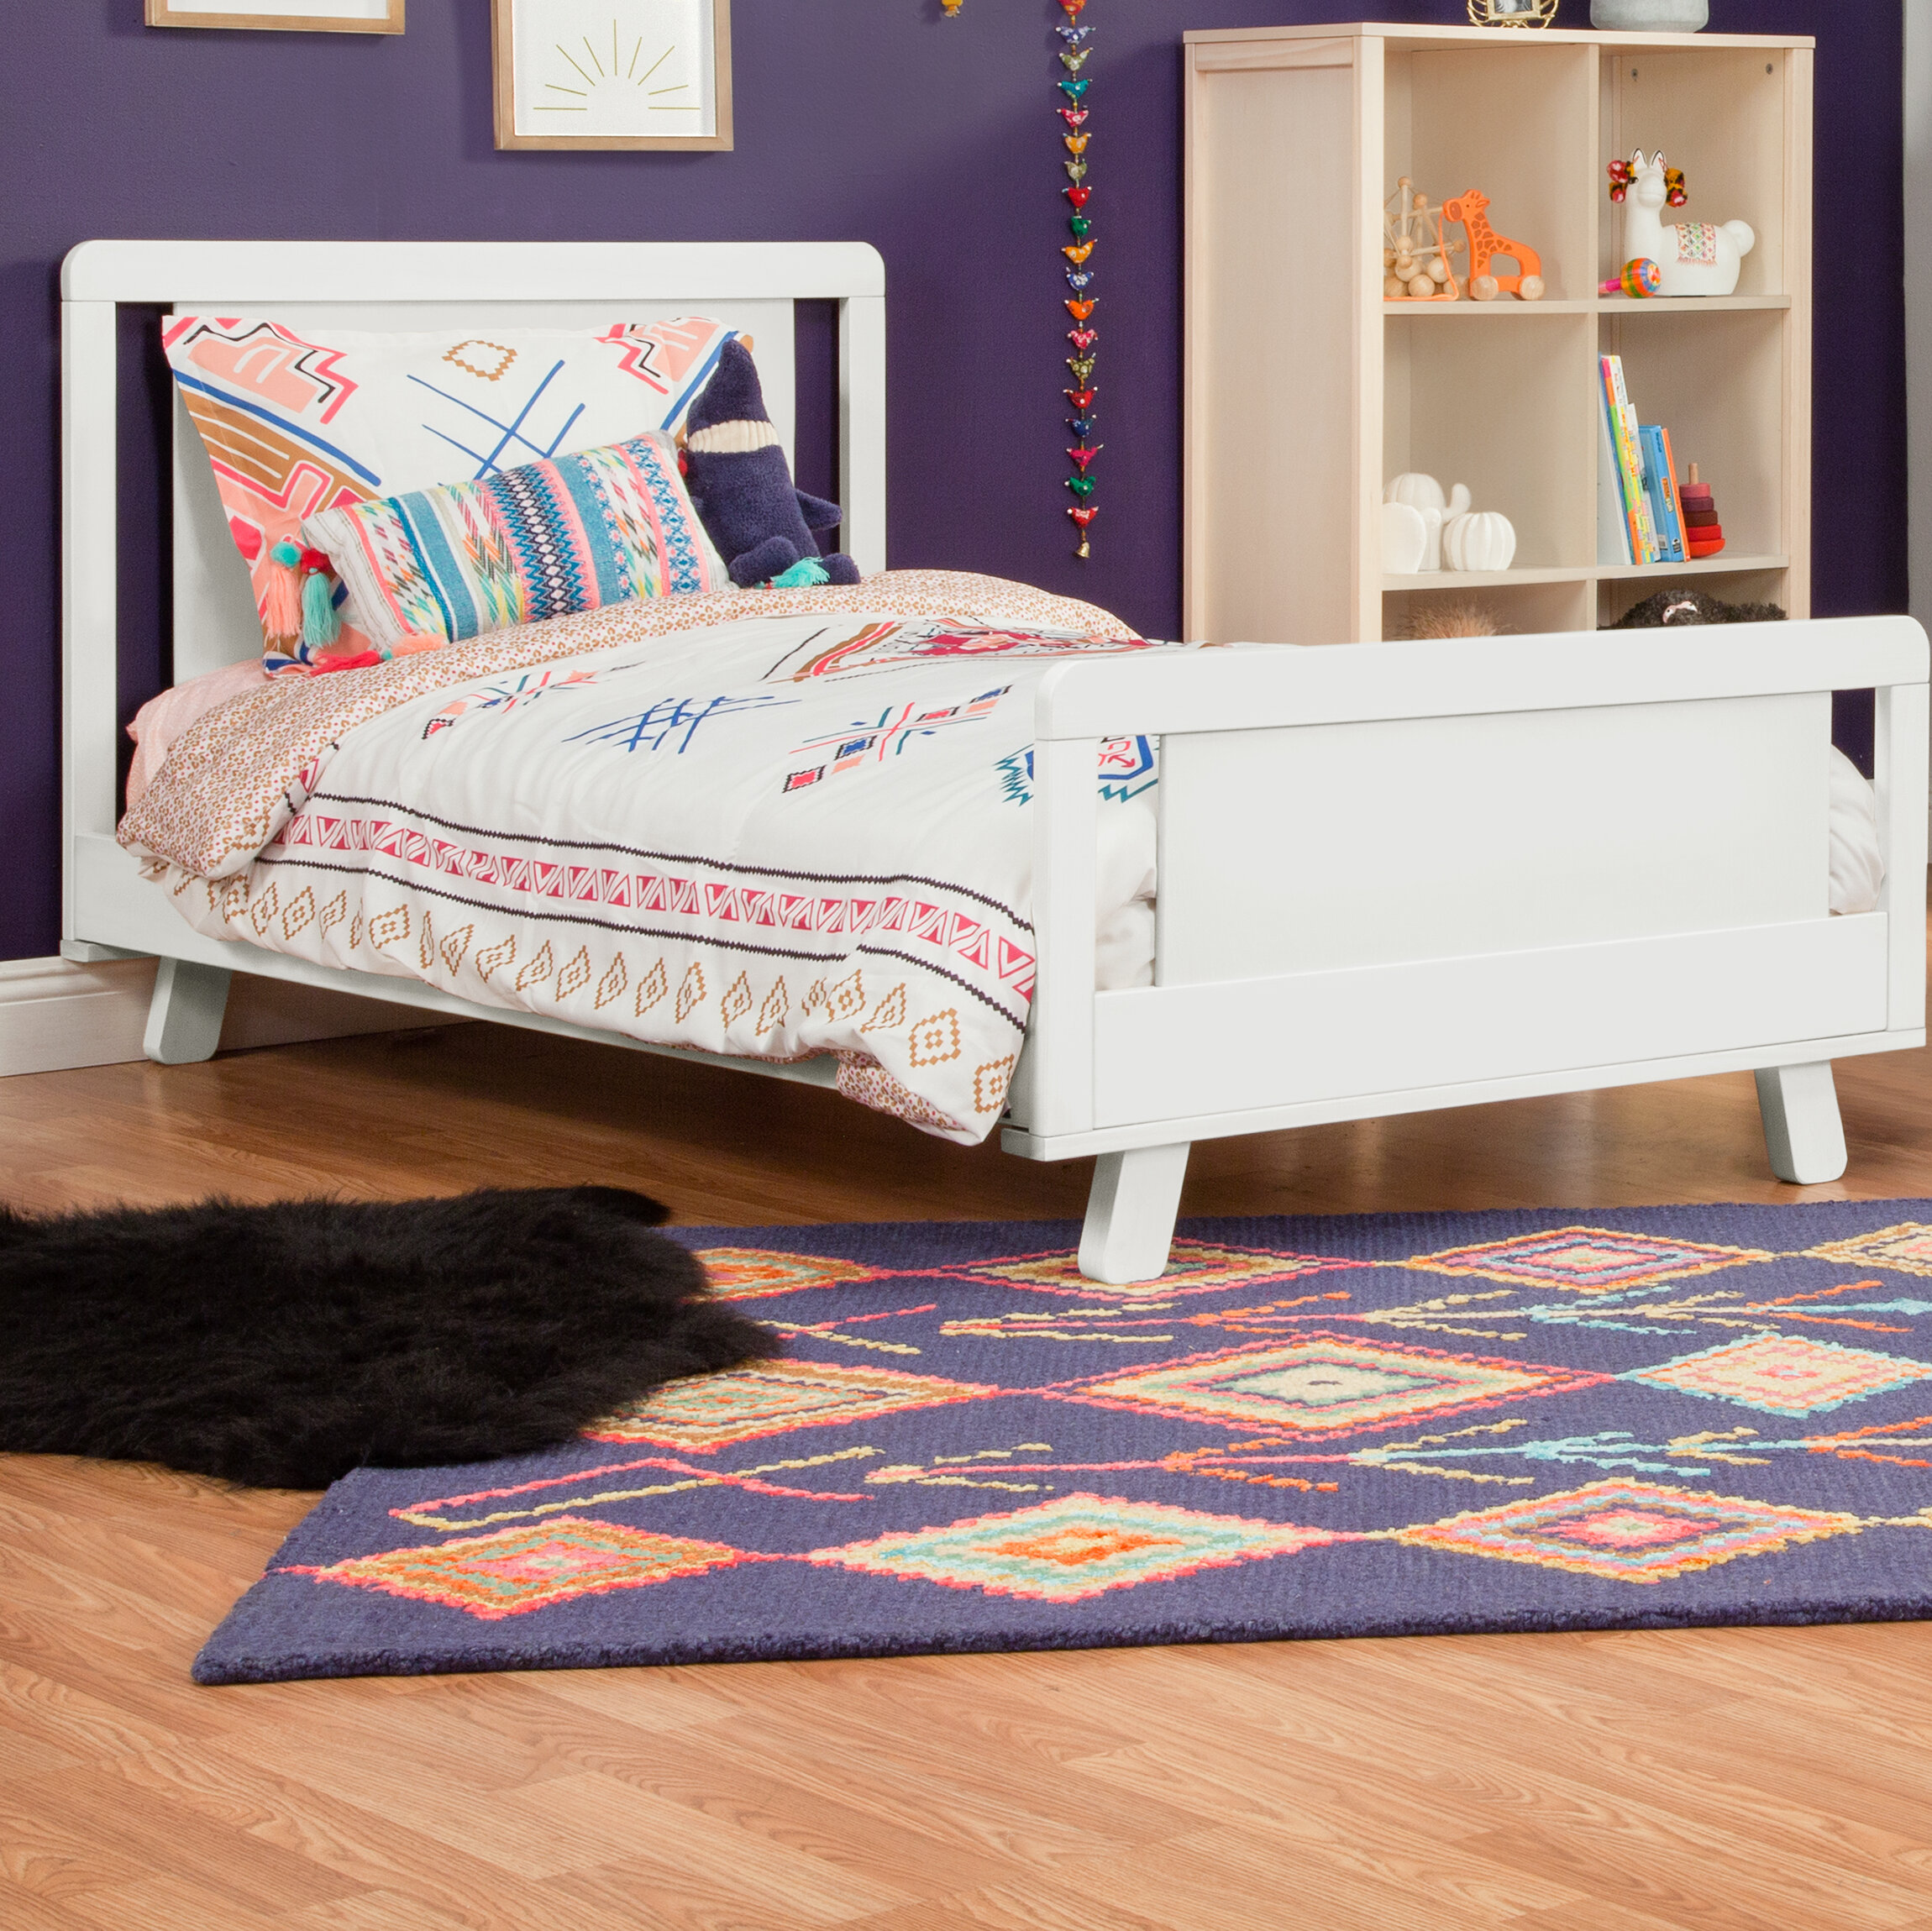 babyletto hudson bed